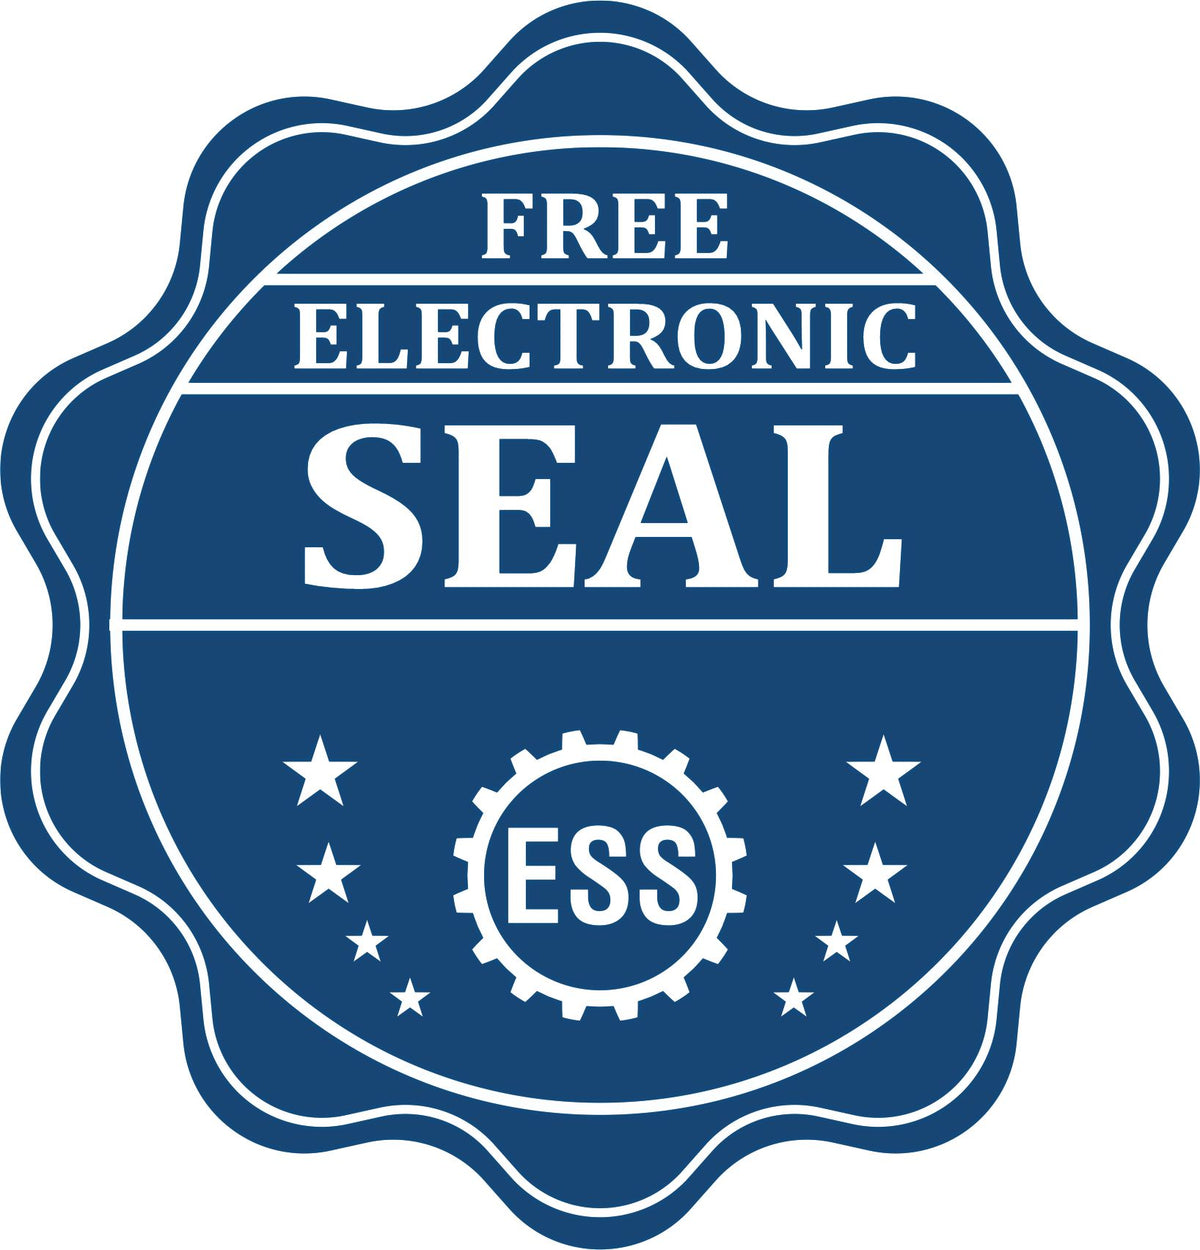 A badge showing a free electronic seal for the Hybrid Florida Geologist Seal with stars and the ESS gear on the emblem.